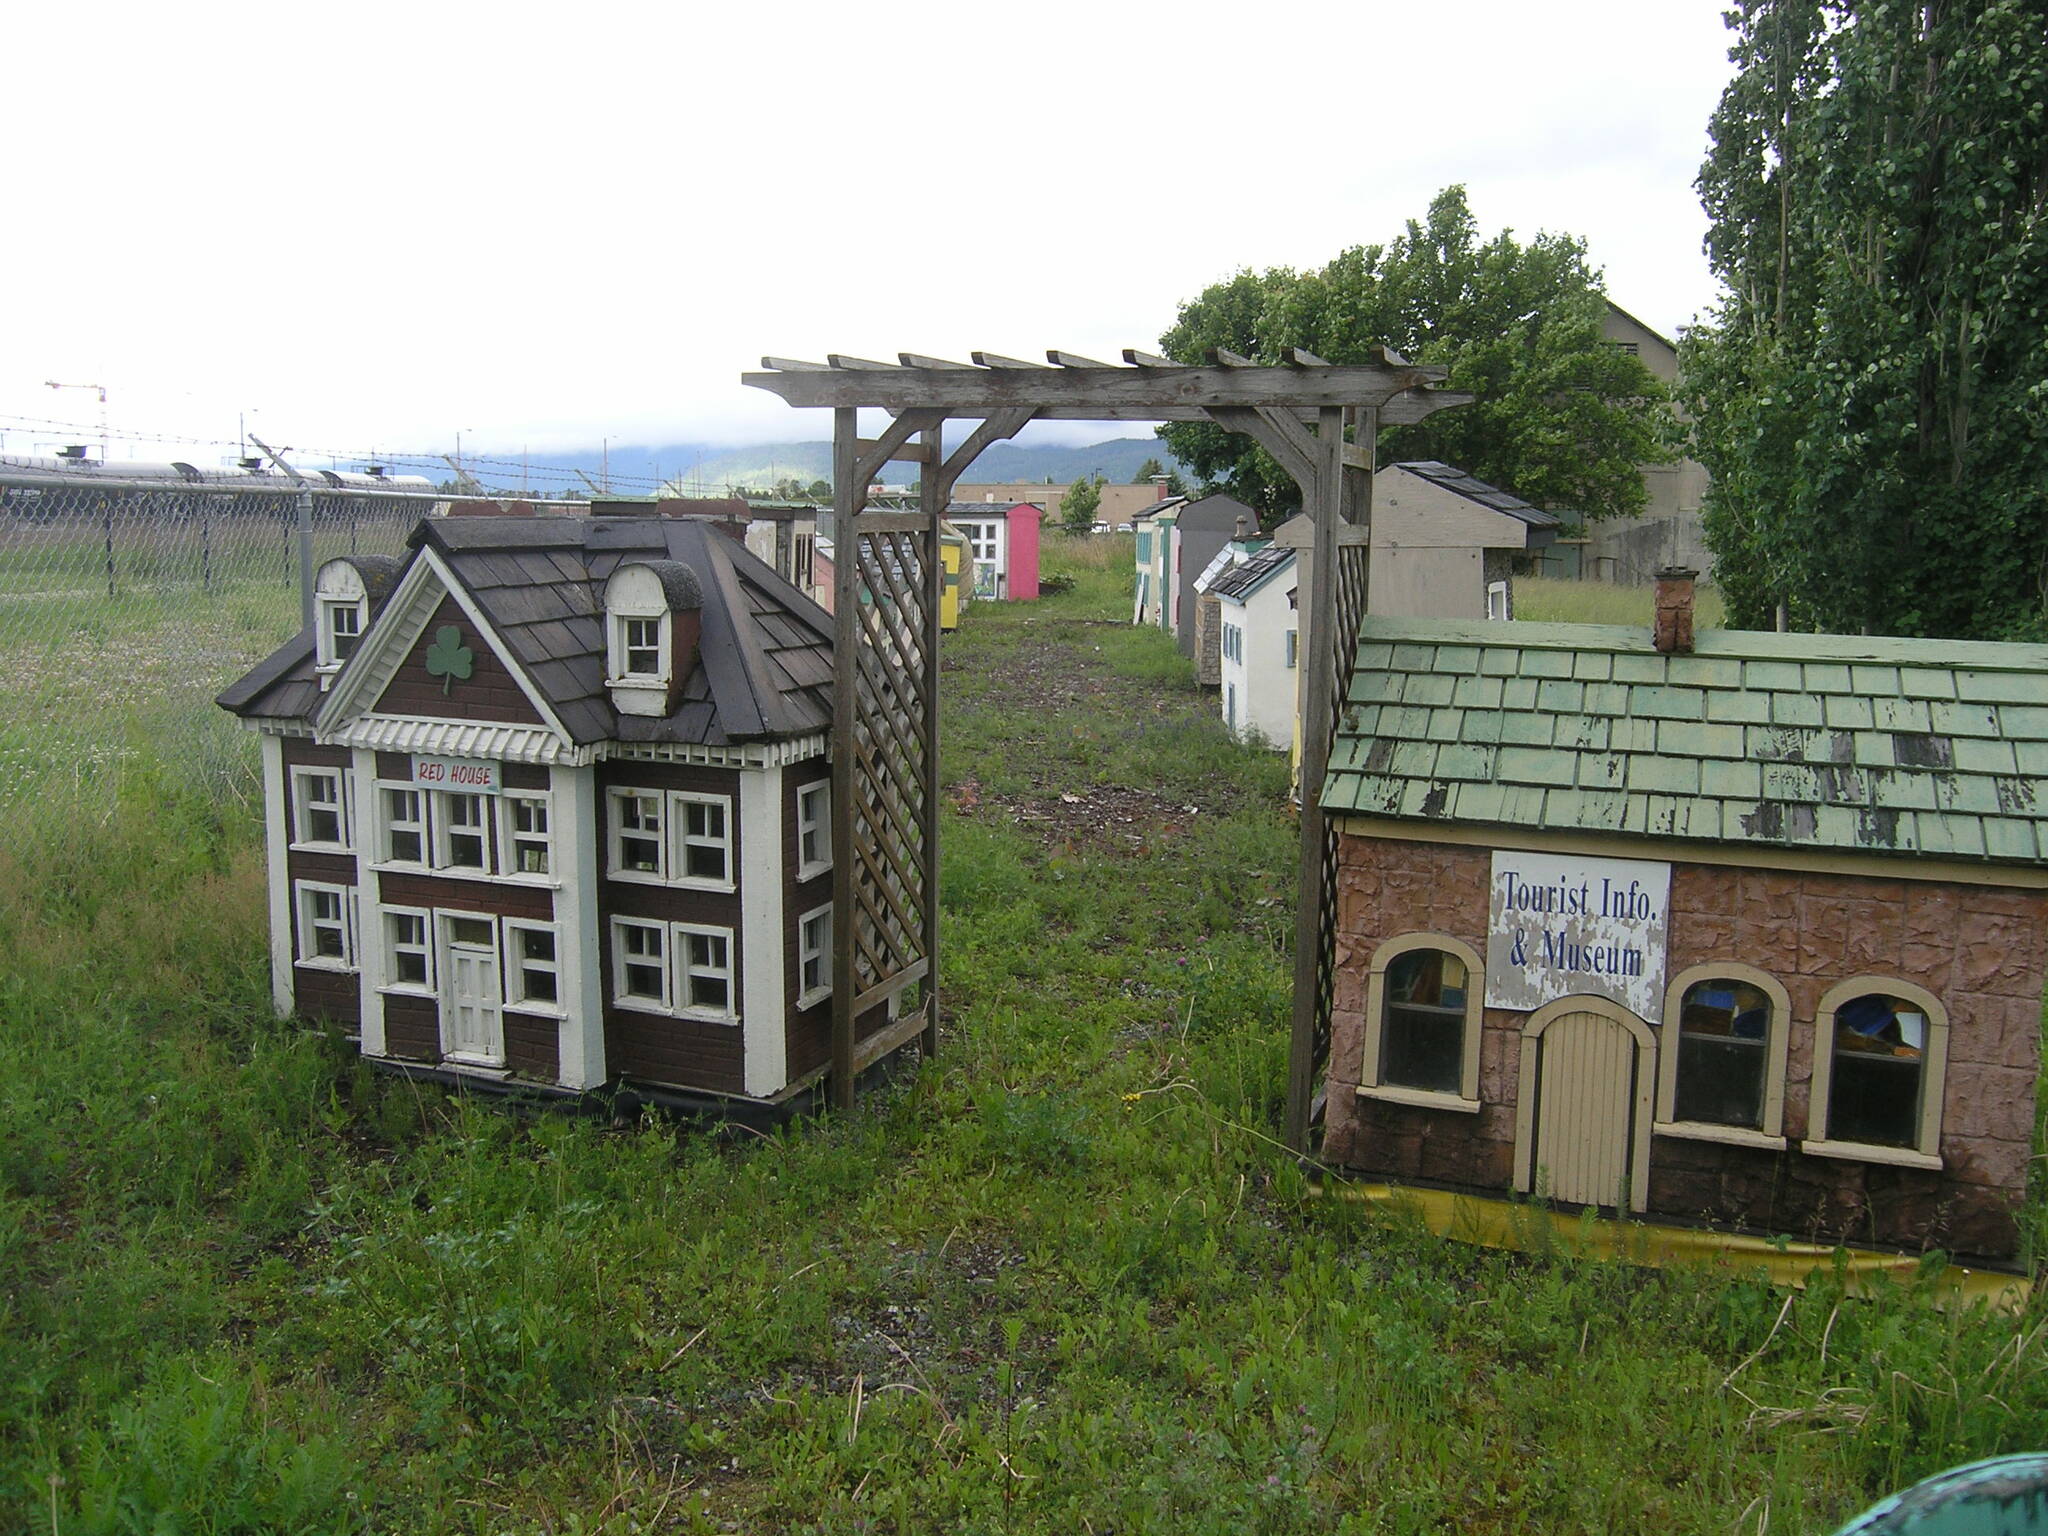 Tiny Town, a collection of miniature buildings beside the George Little House, is to be dismantled. (Staff photo)